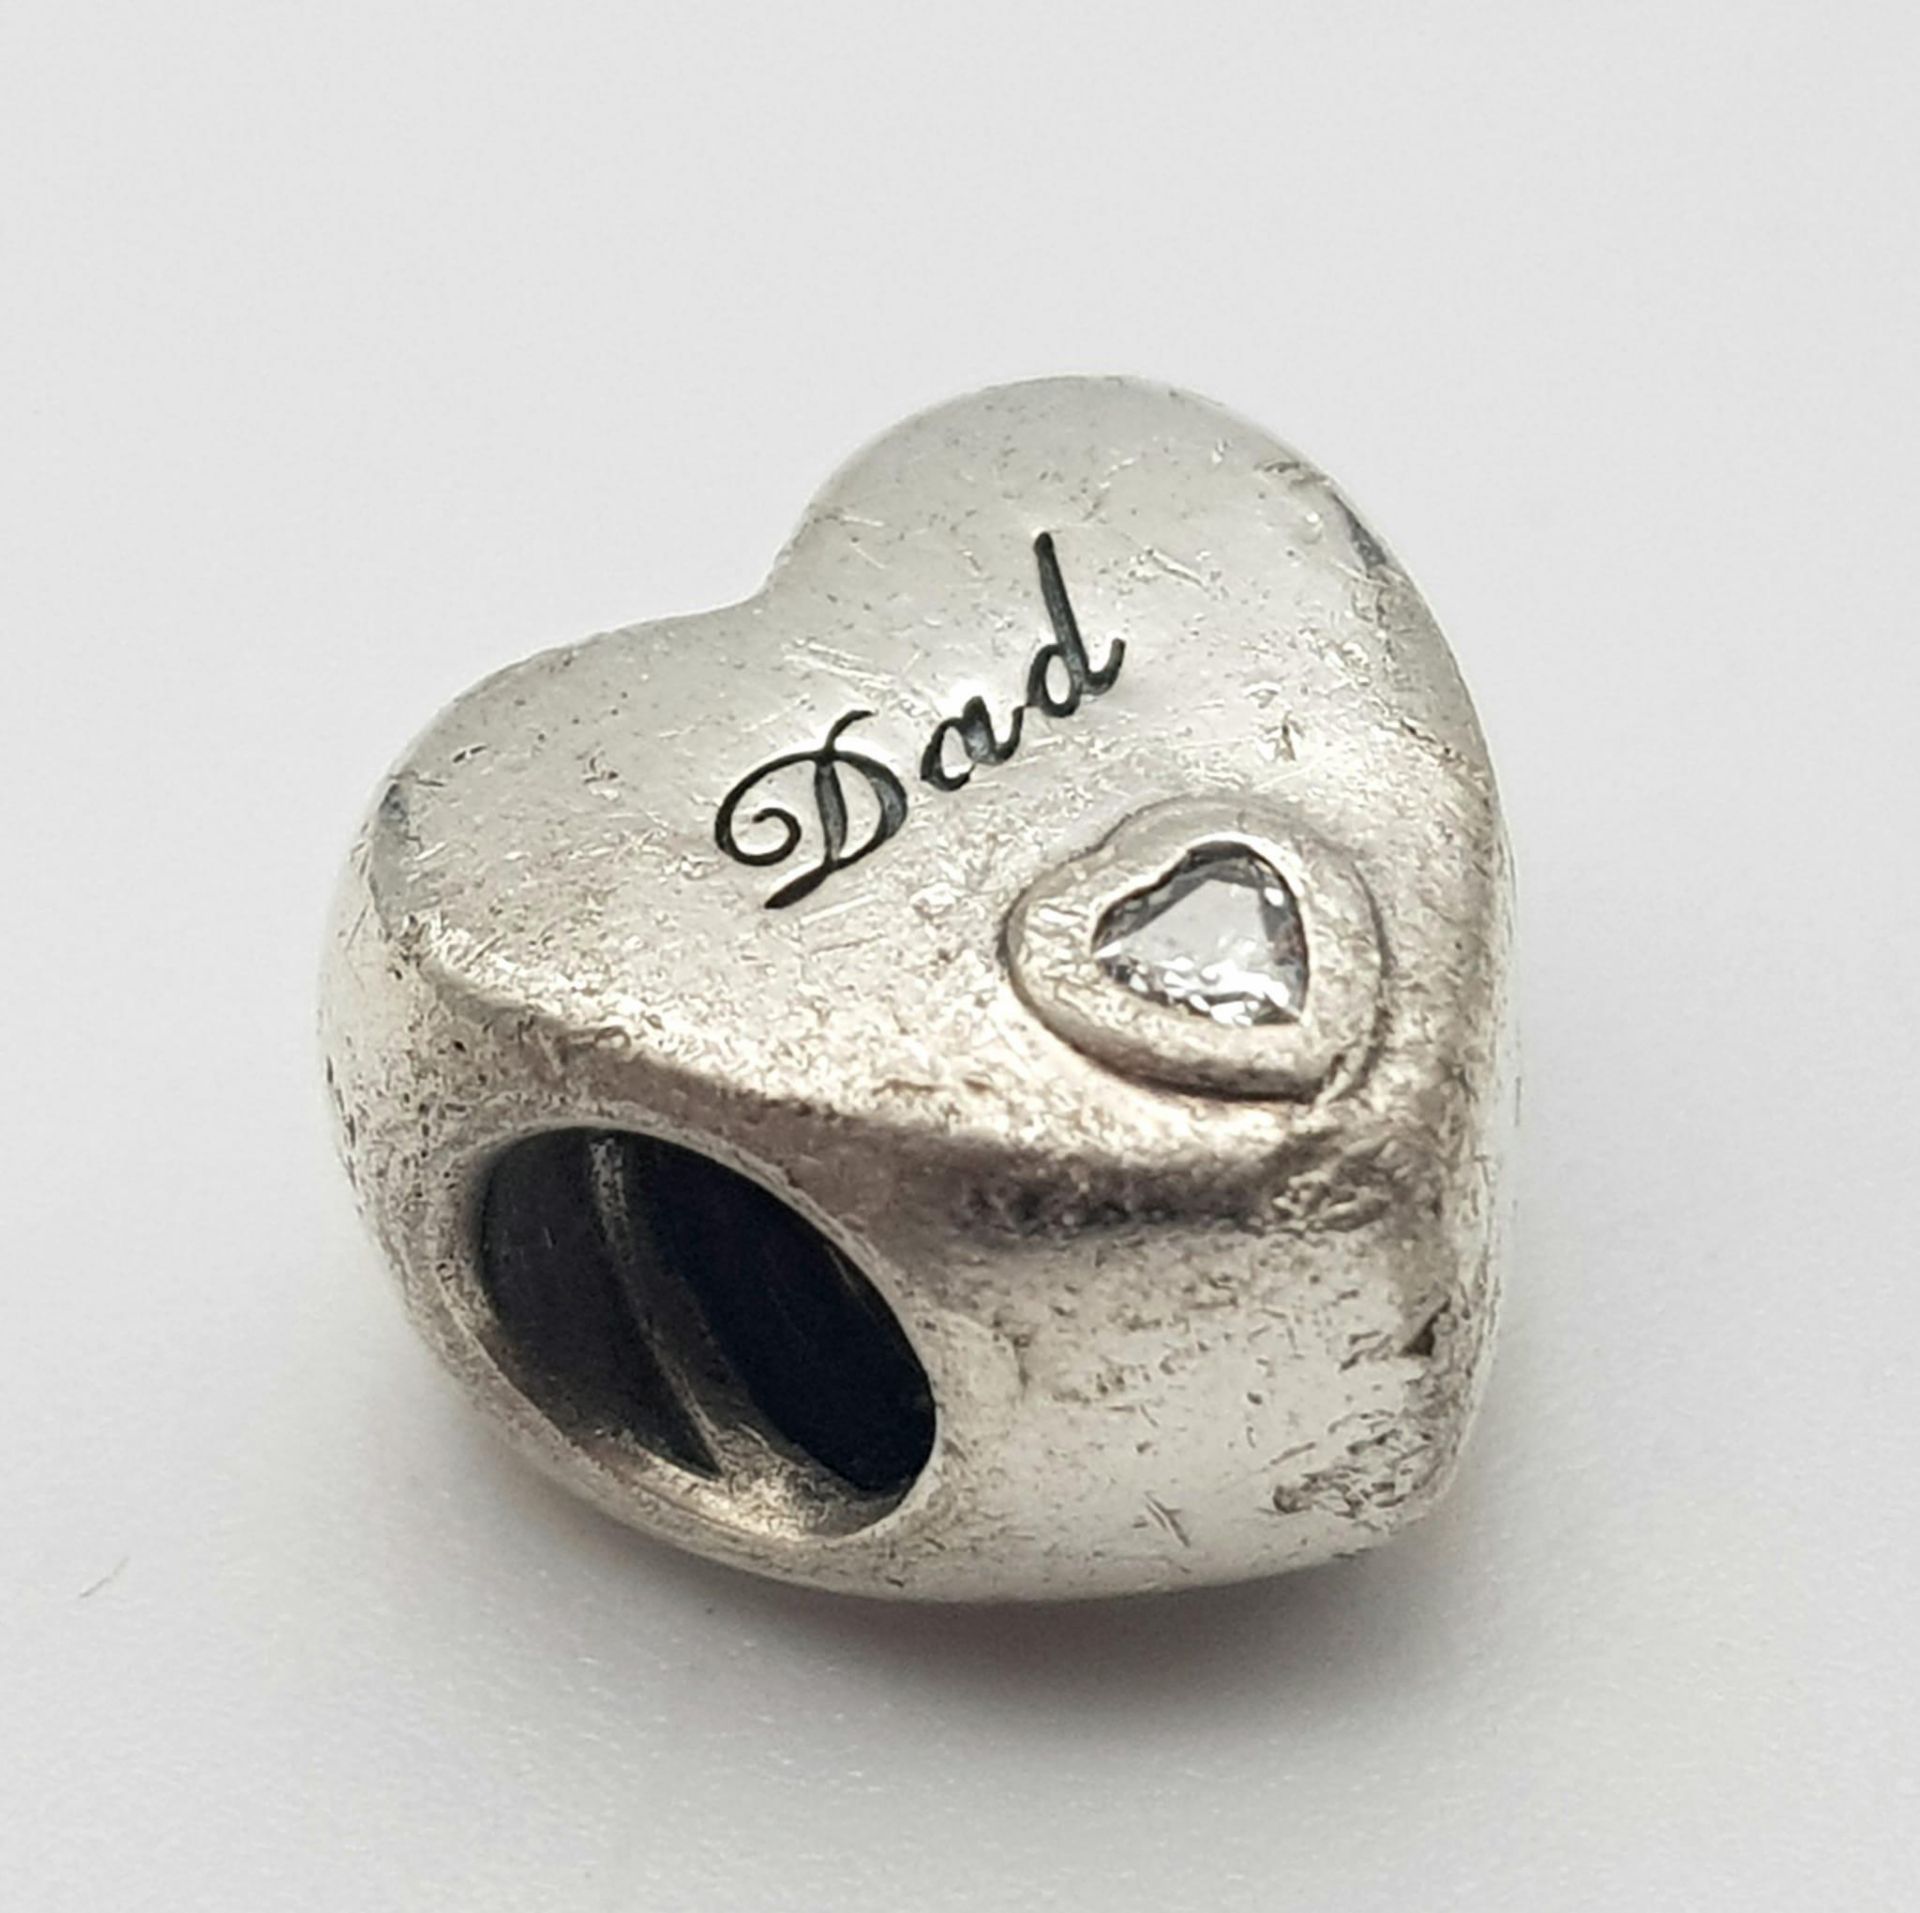 A PANDORA STERLING SILVER HEART SHAPED STONE SET CHARM, ENGRAVED WITH THE WORD "DAD" 3.9G ref: SC